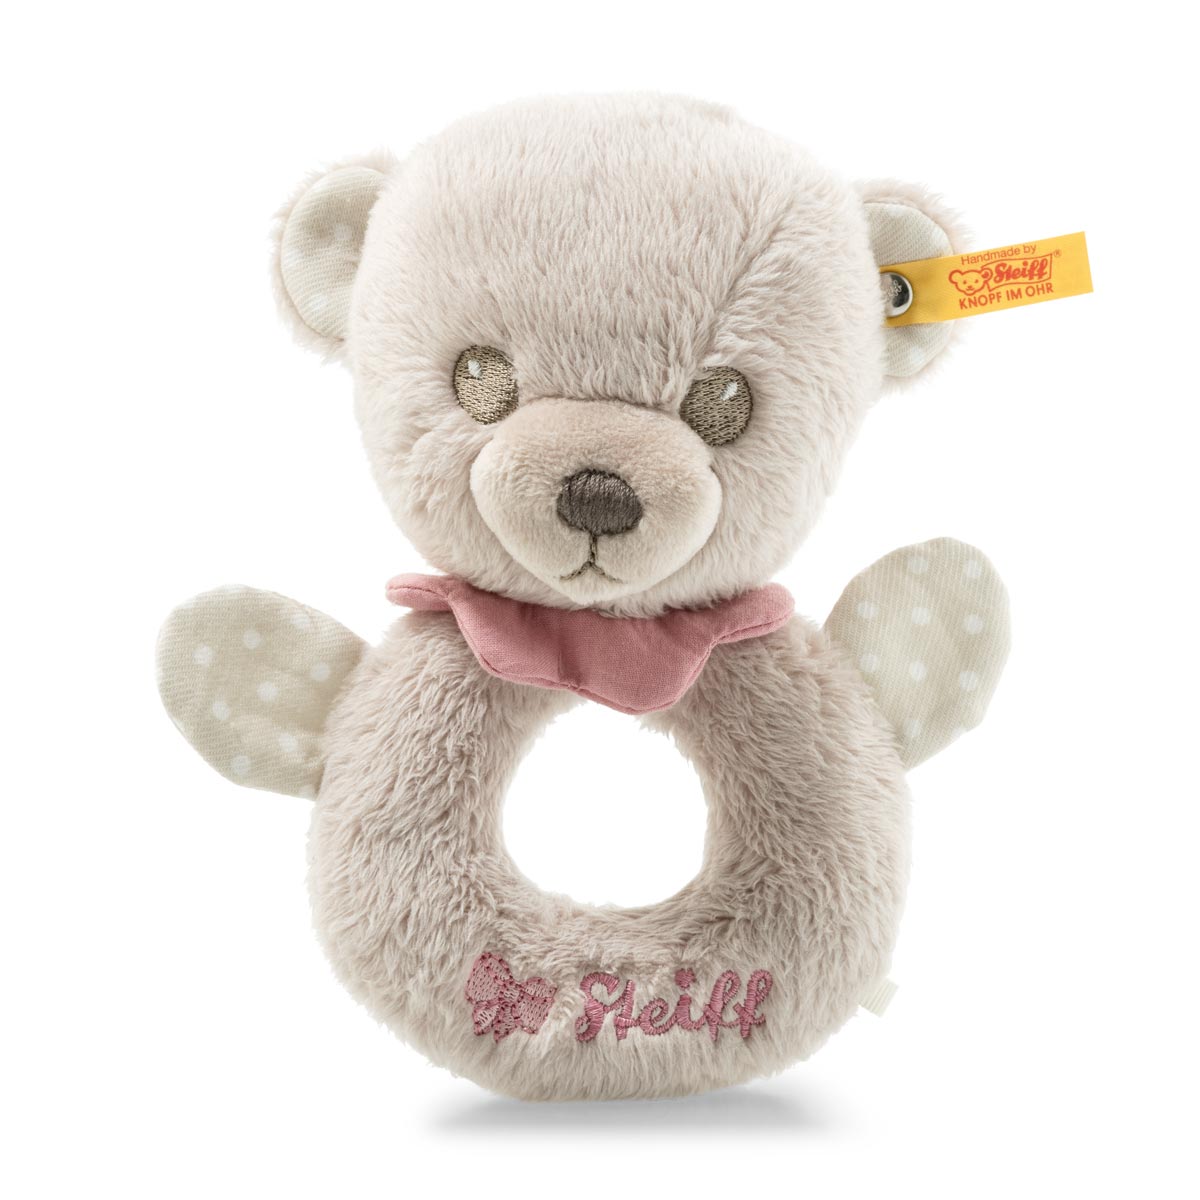 Steiff Hello Baby Lea Teddy Bear Grip Ring with Rattle in a Gift Box